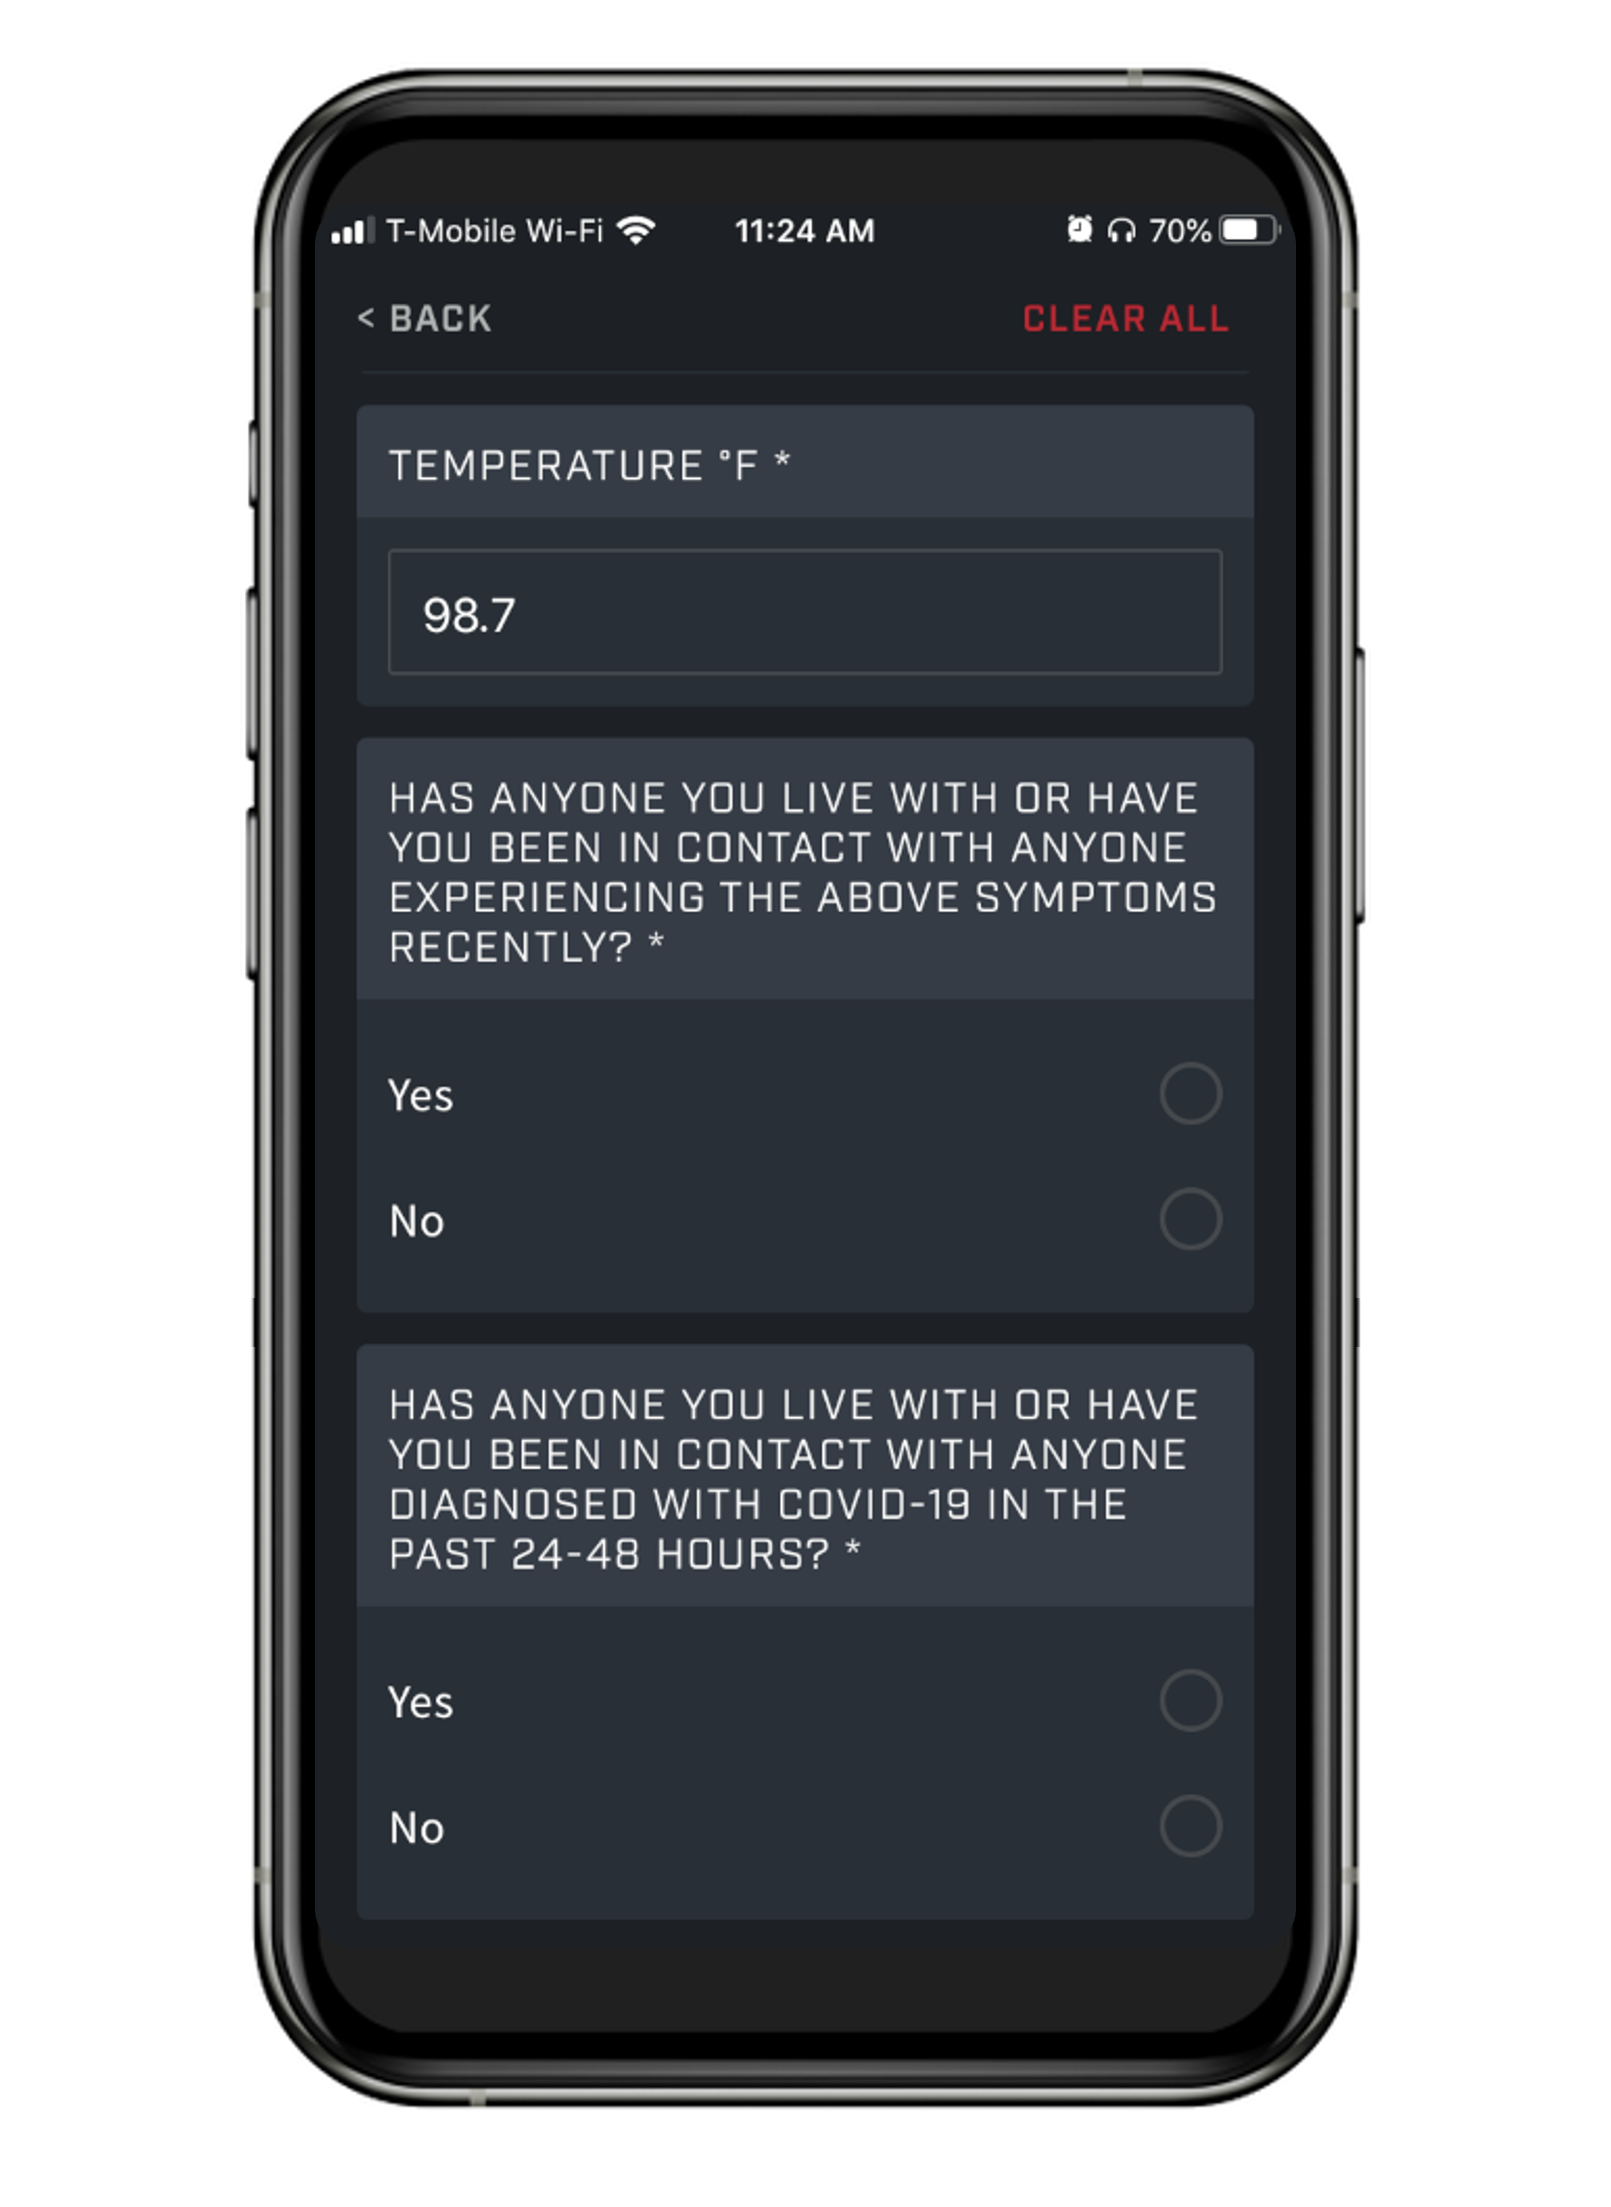 A screenshot of the temperature field that can be filled out via Bluetooth.